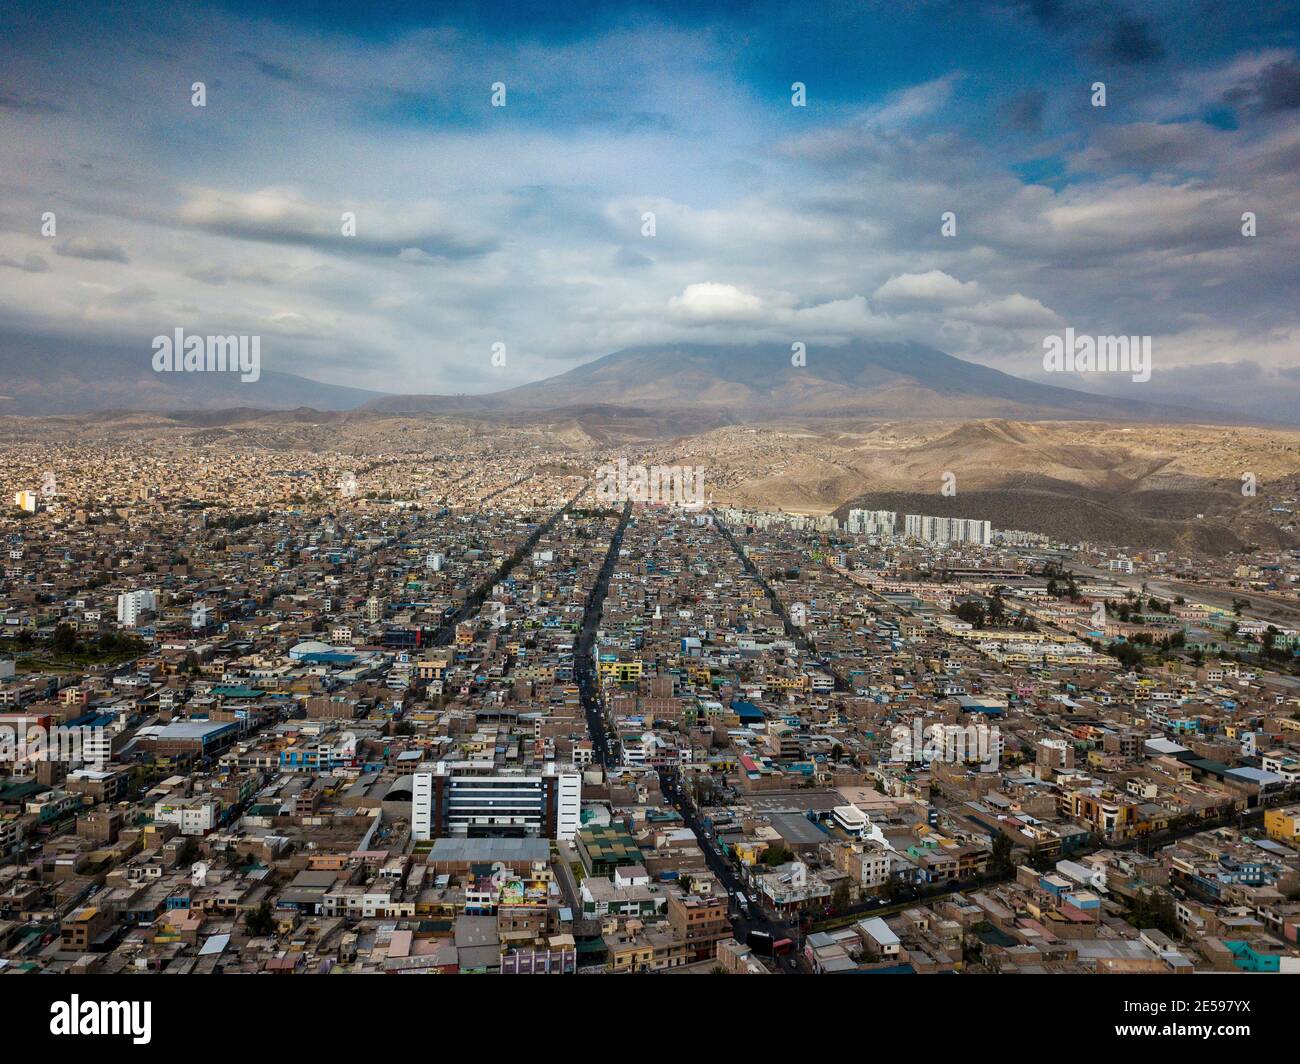 Aerial view of Arequipa city in Peru. Taken with the drone, a panoramic cityscape scene with buildings and houses and the Misti volcano. Stock Photo